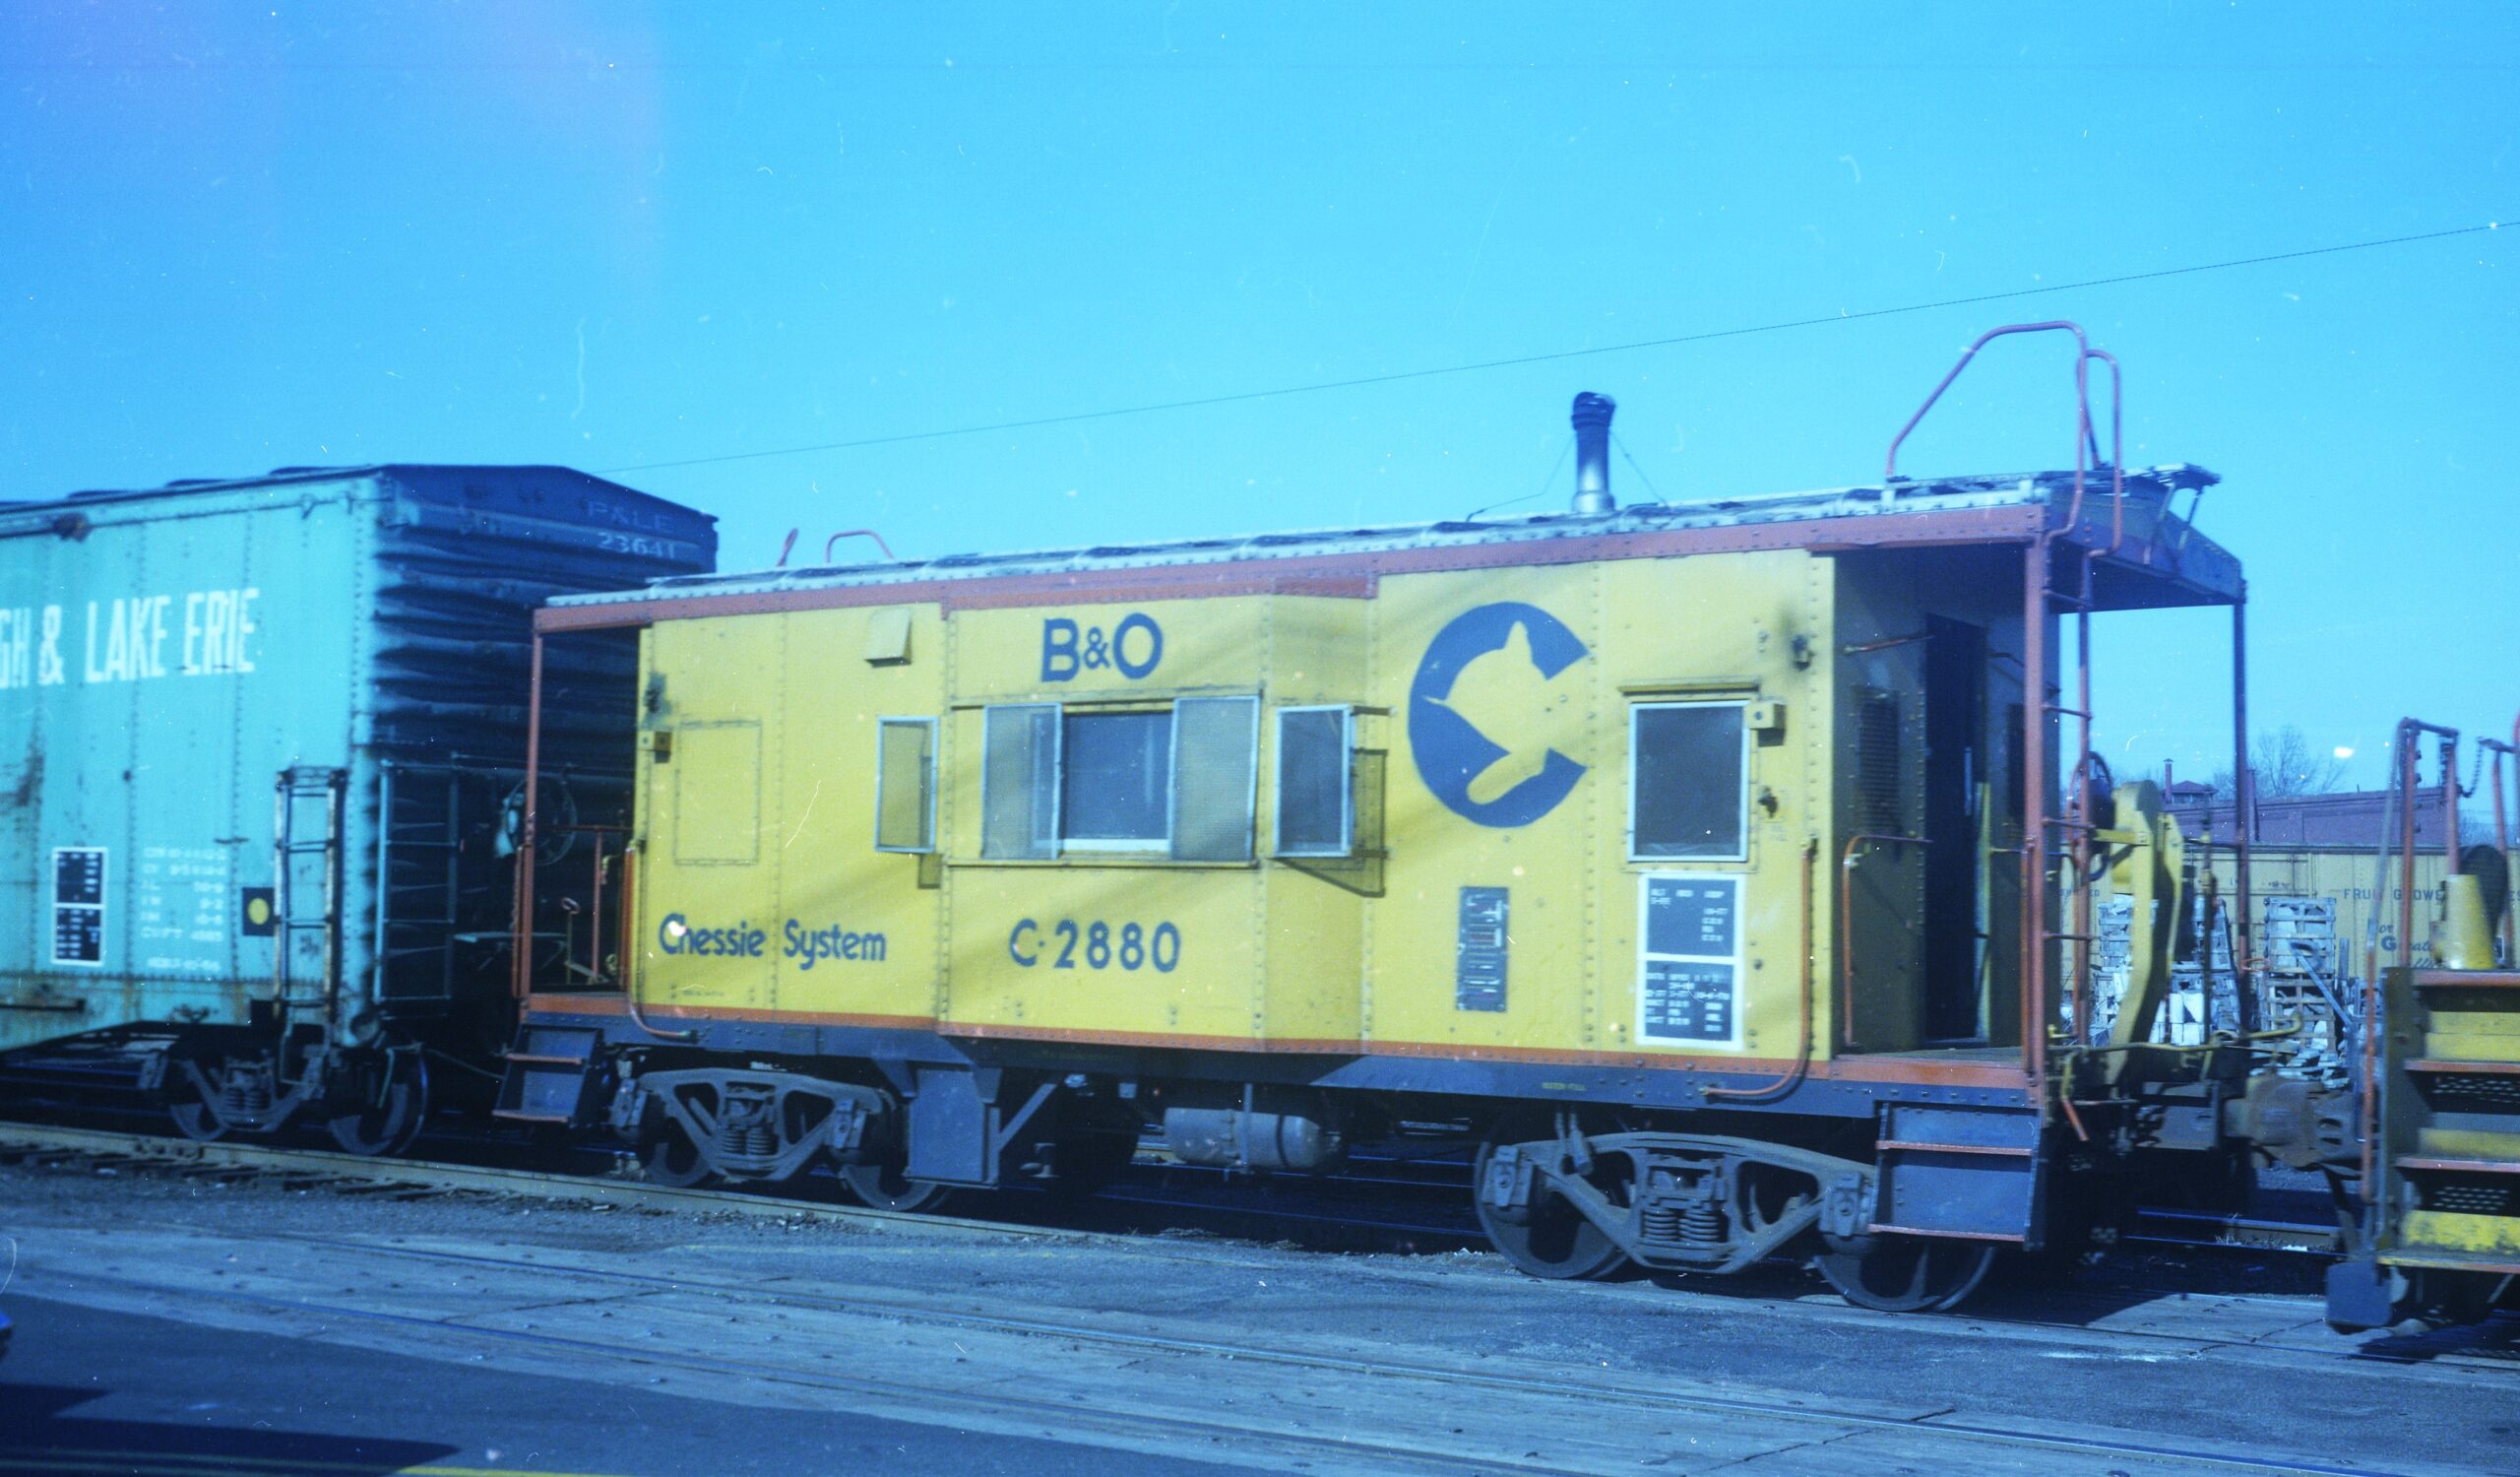 Chessie System | Baltimore & Ohio | Cranford, New Jersey | Class I-17a caboose C-2880 | January 16, 1979